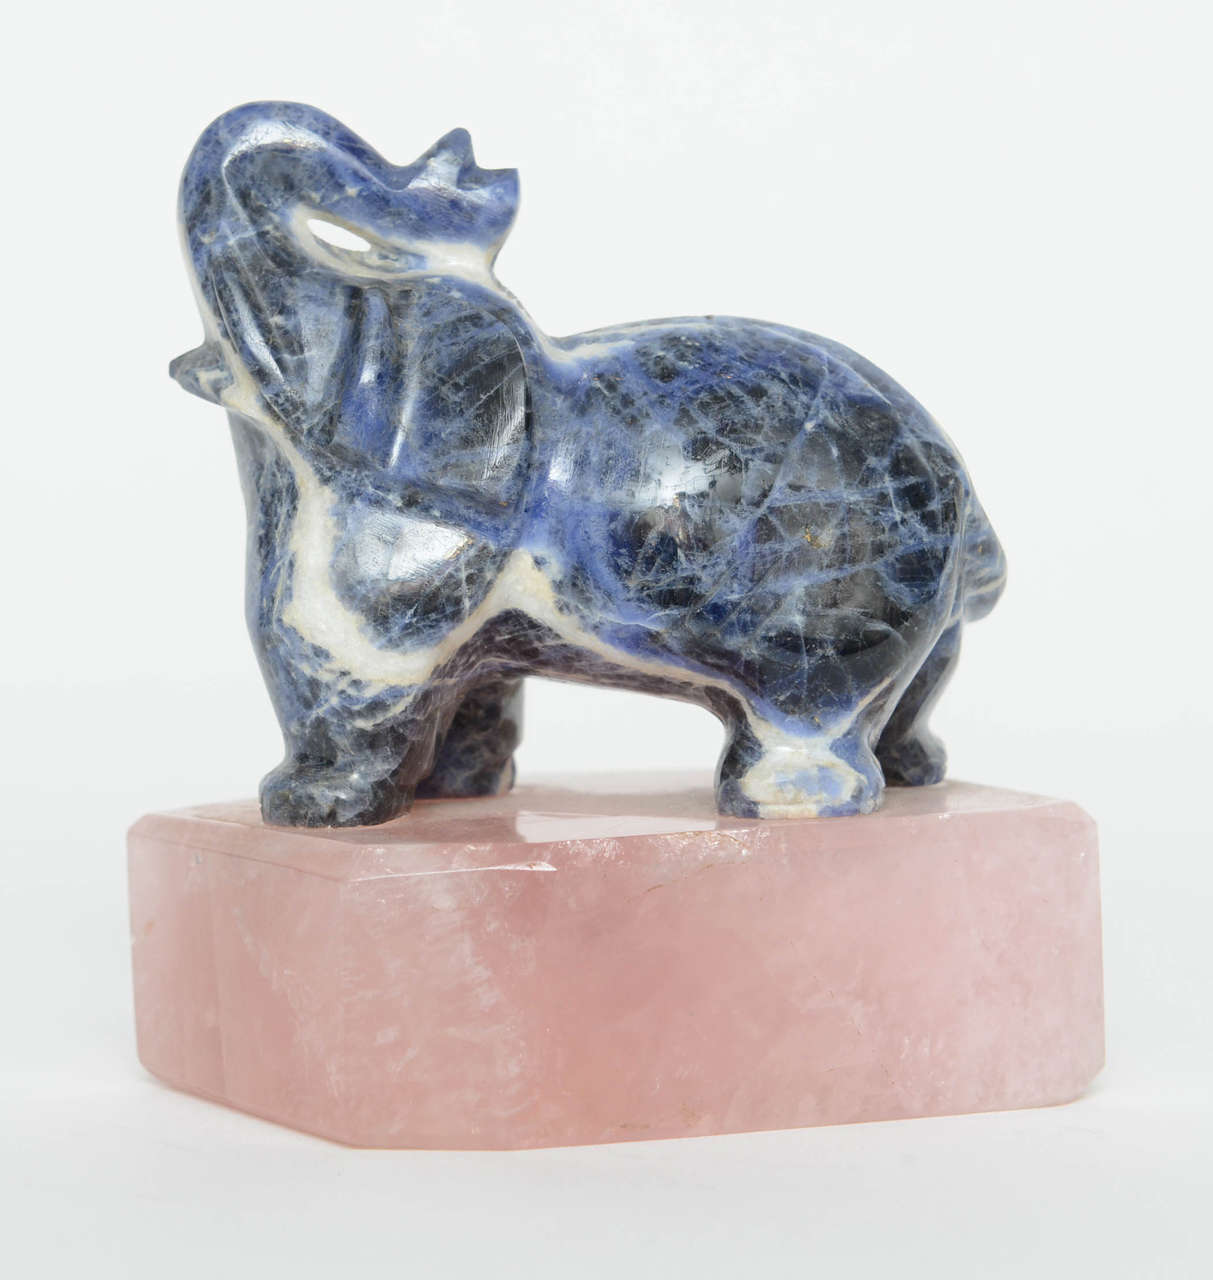 perfect size for a paperweight or just show as an art object.

Sodalite is a rich royal blue tectosilicate mineral widely enjoyed as an ornamental gemstone. Although massive sodalite samples are opaque, crystals are usually transparent to